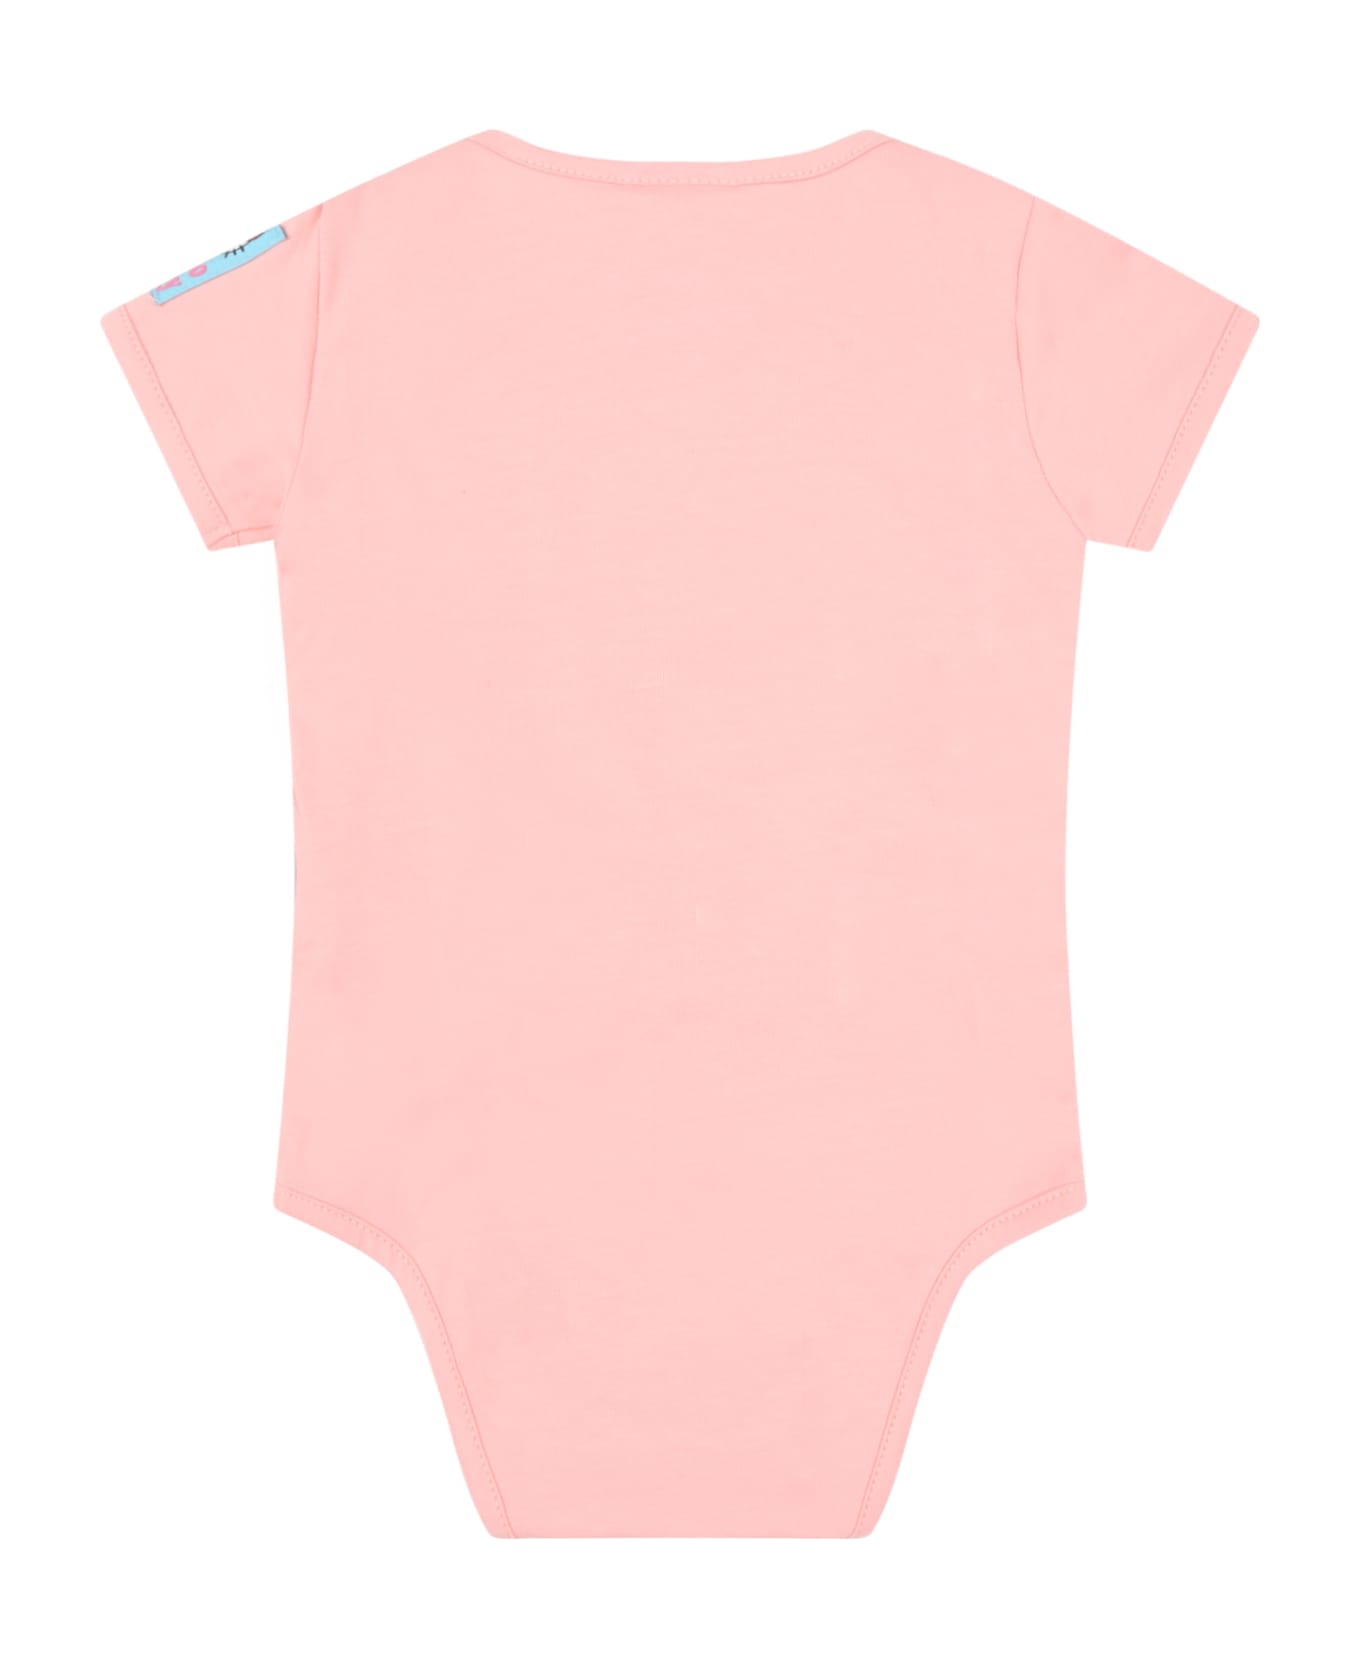 GCDS Mini Pink Set For Baby Girl With Hello Kitty - Pink